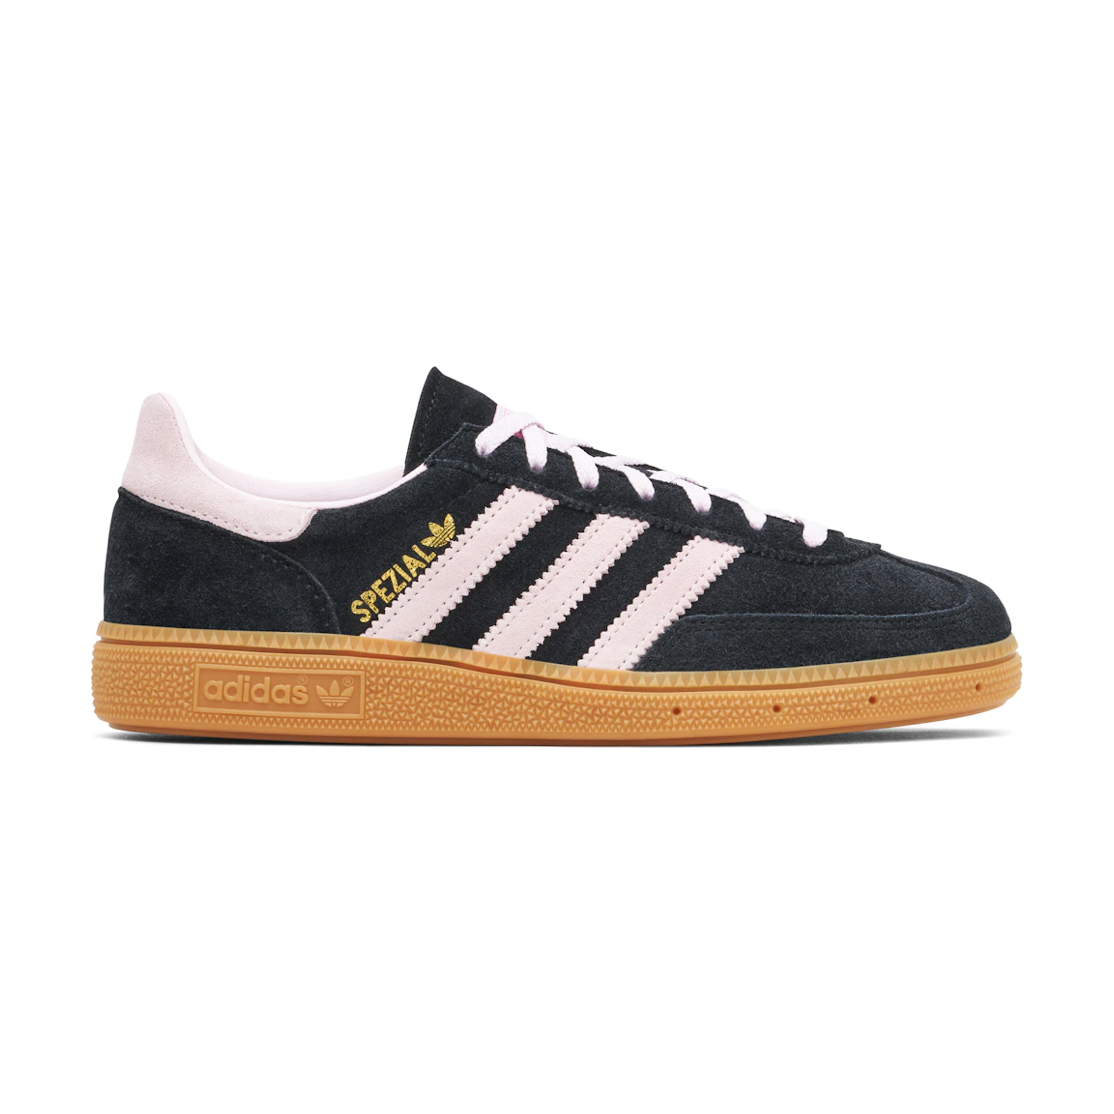 adidas Handball Spezial Core Black Clear Pink Gum (Women's) by Adidas from £135.00